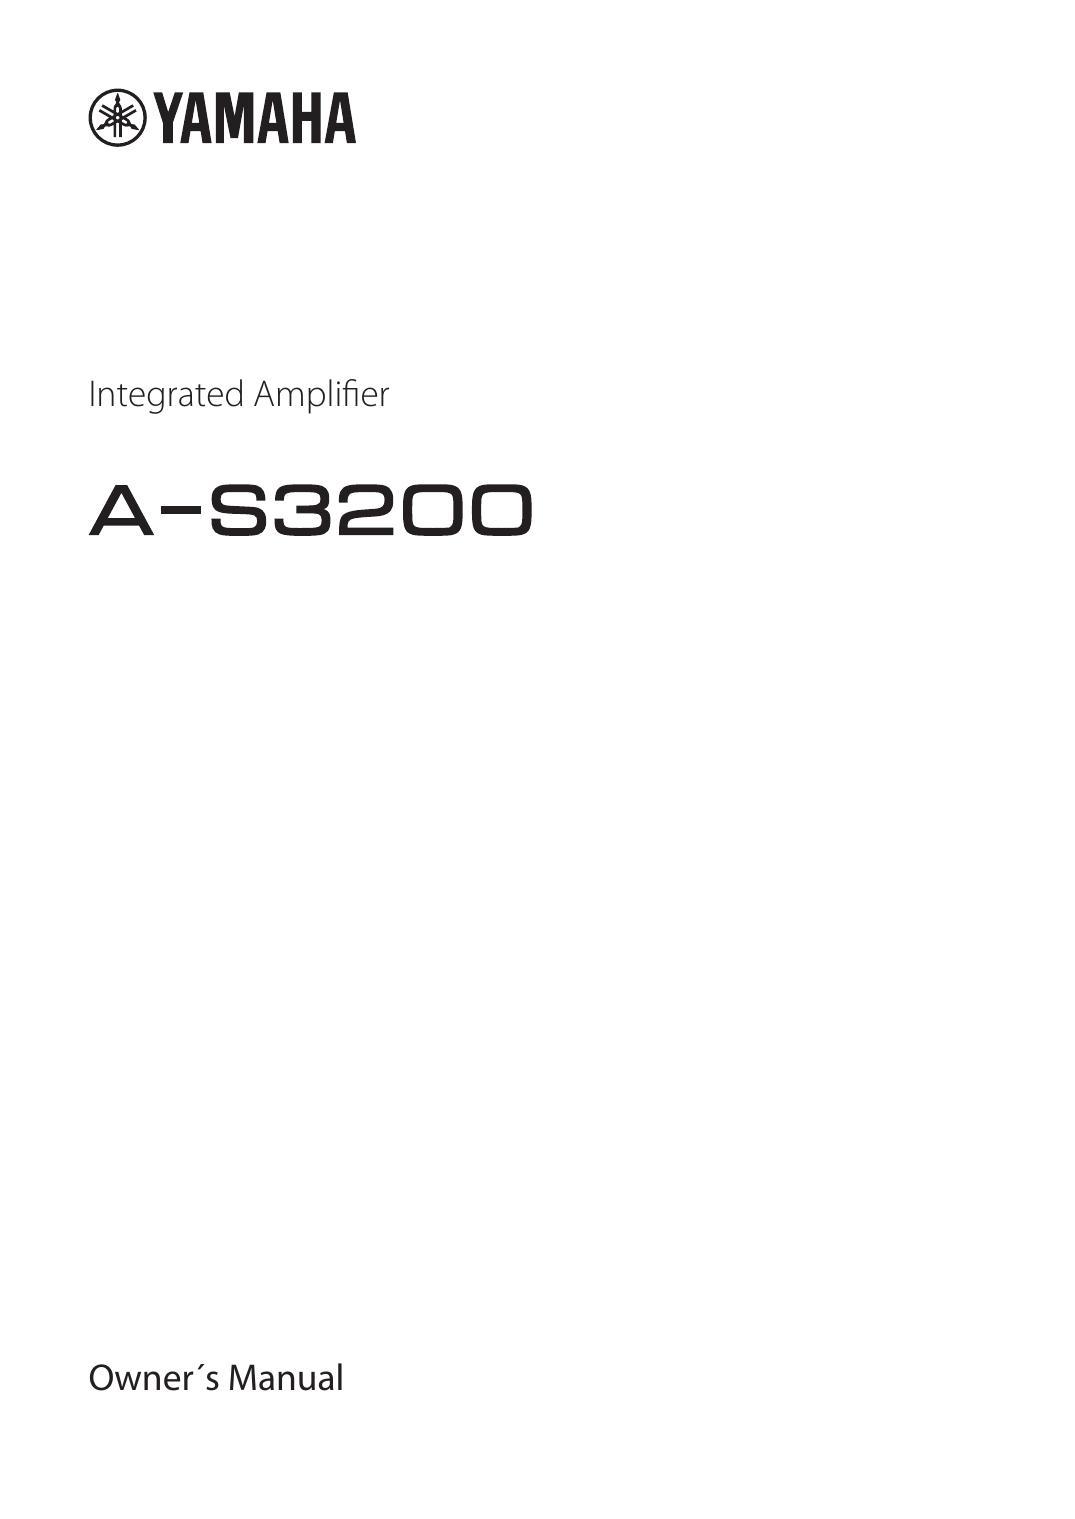 yamaha-a-s3200-integrated-amplifier-owners-manual.pdf